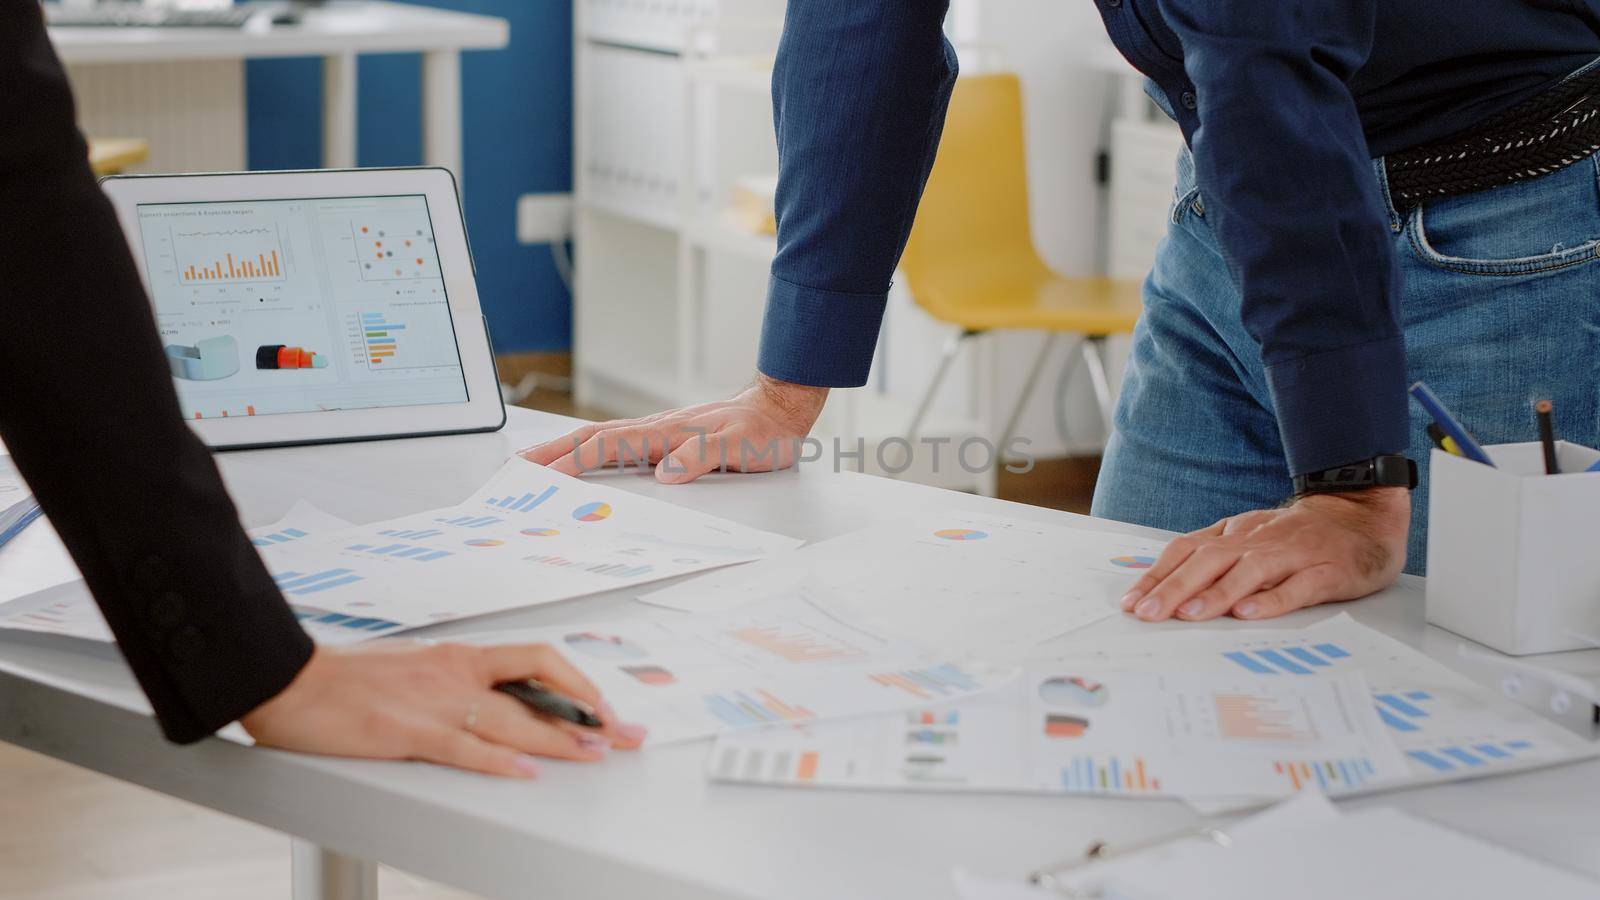 Close up of analysis documents with data charts on desk by DCStudio